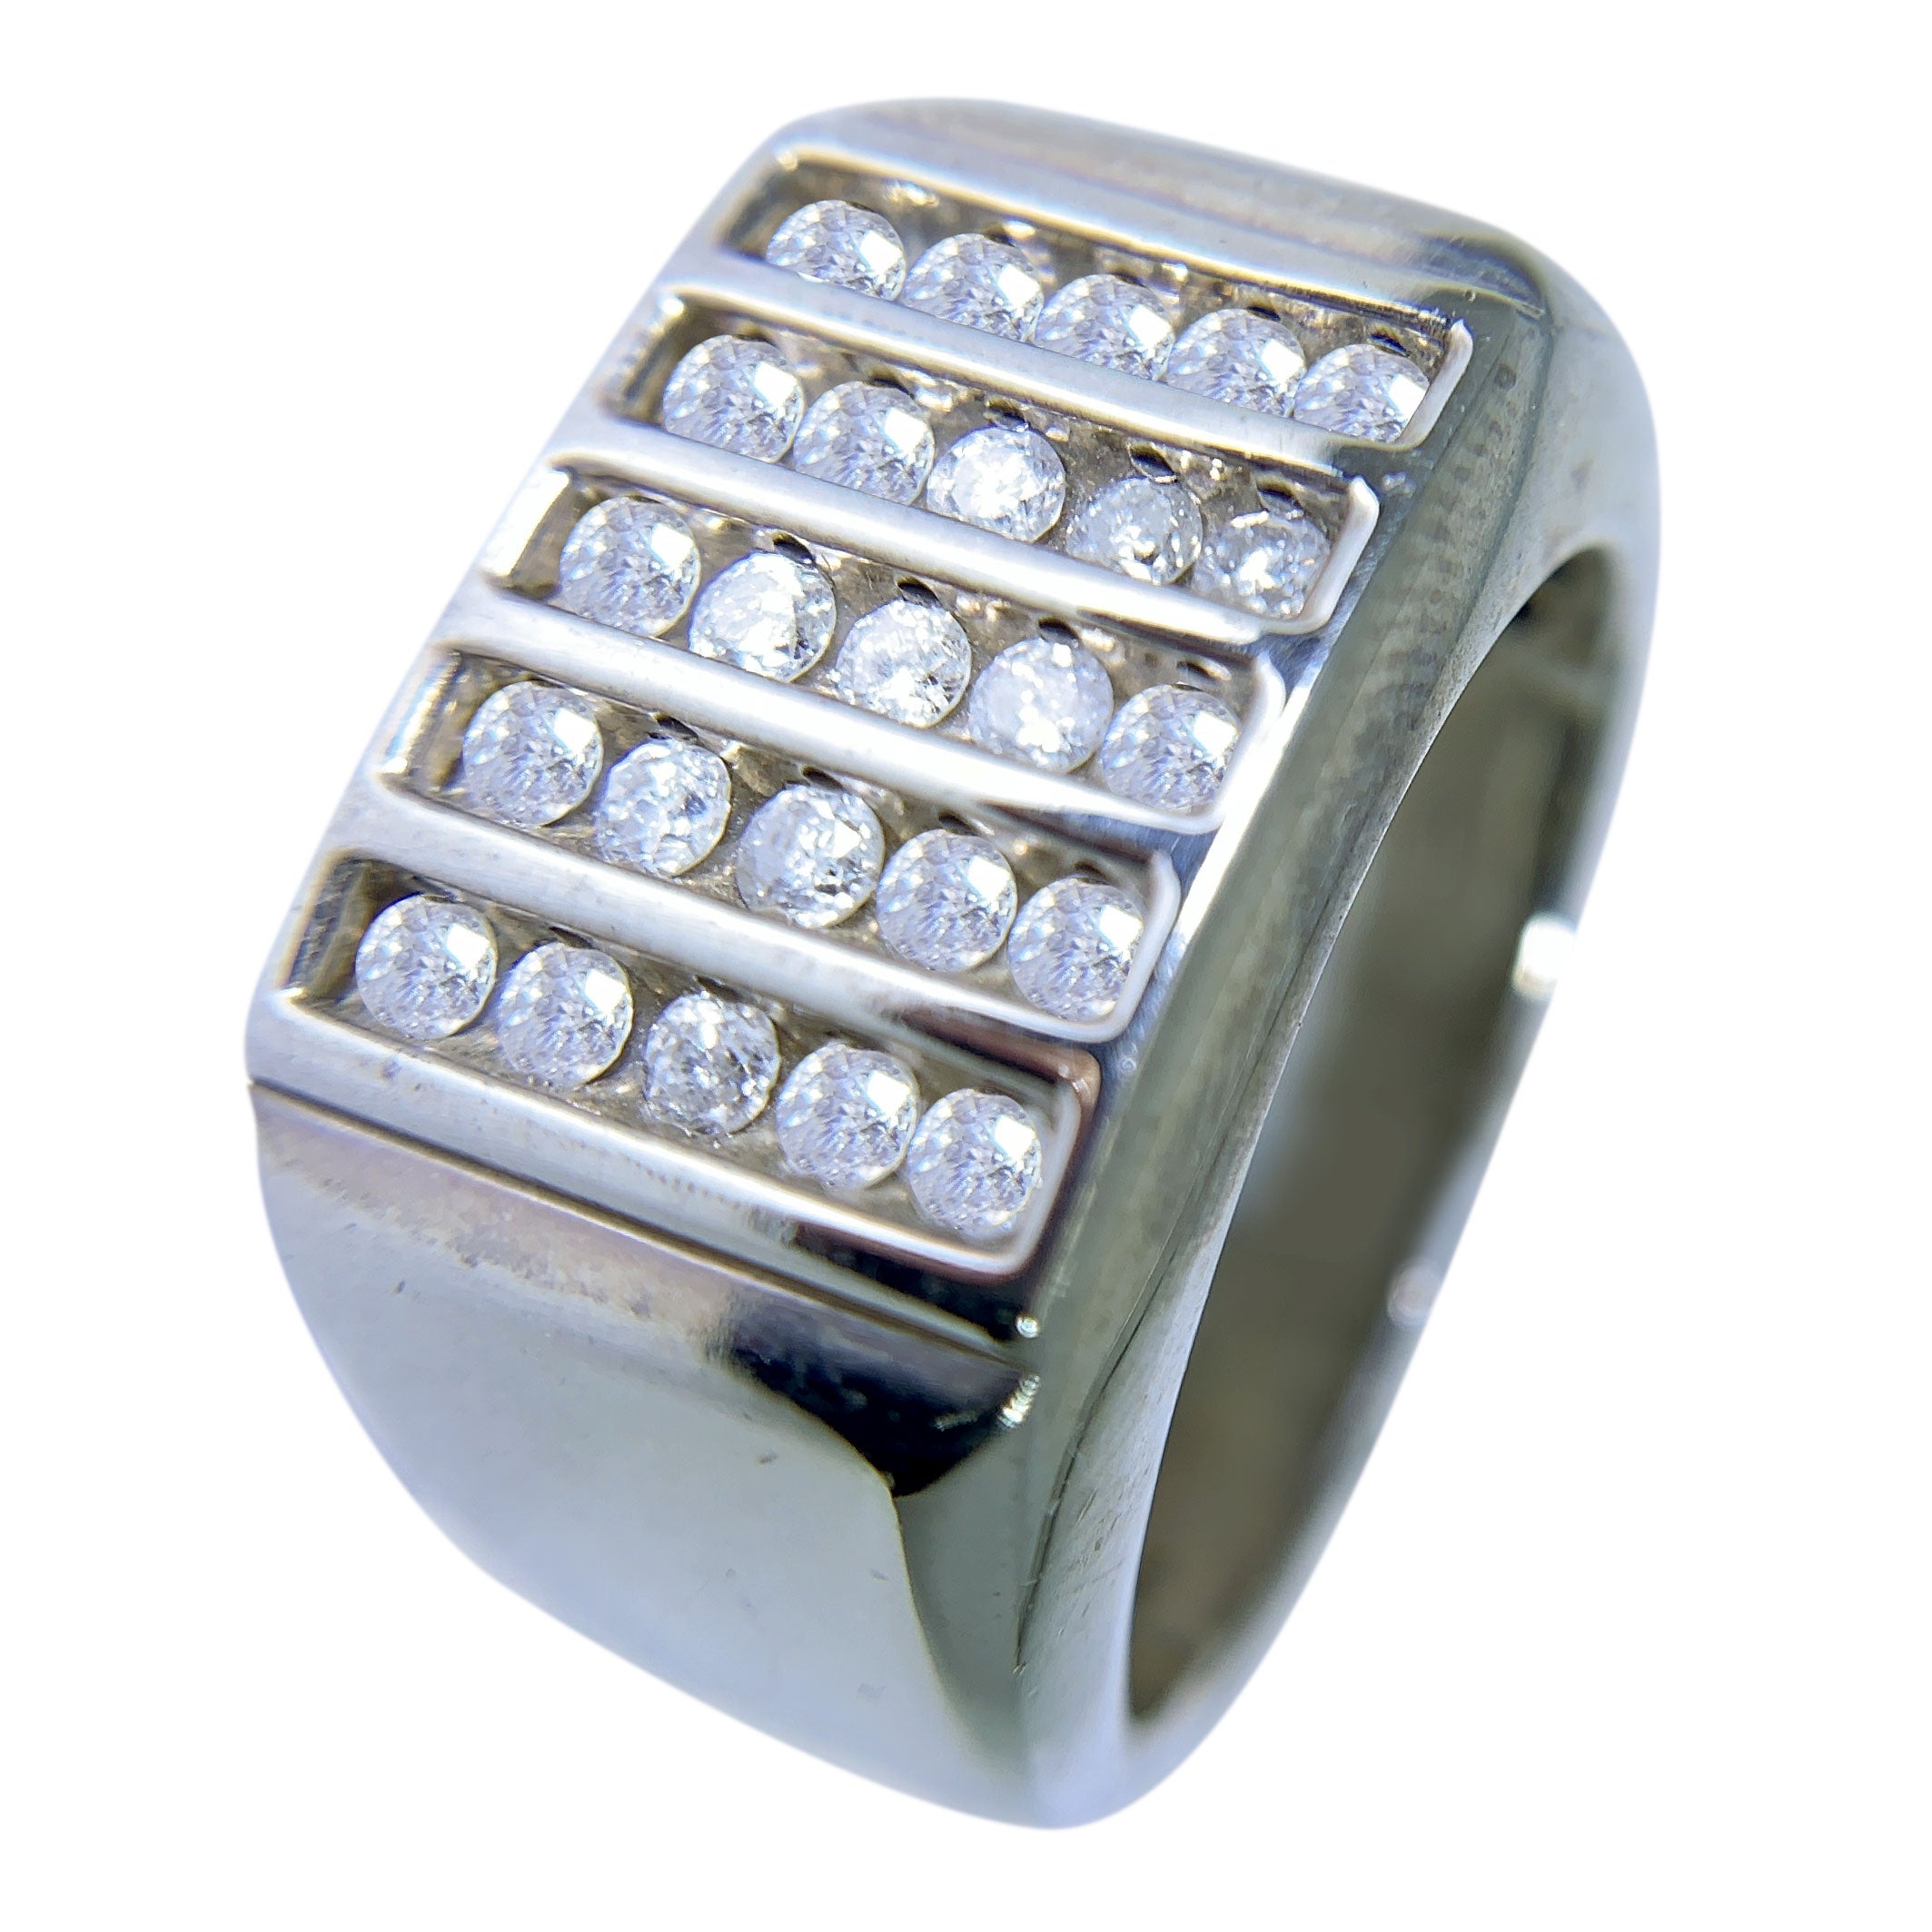 SILVER RING WITH ROUND DIAMONDS - 1.25 CT